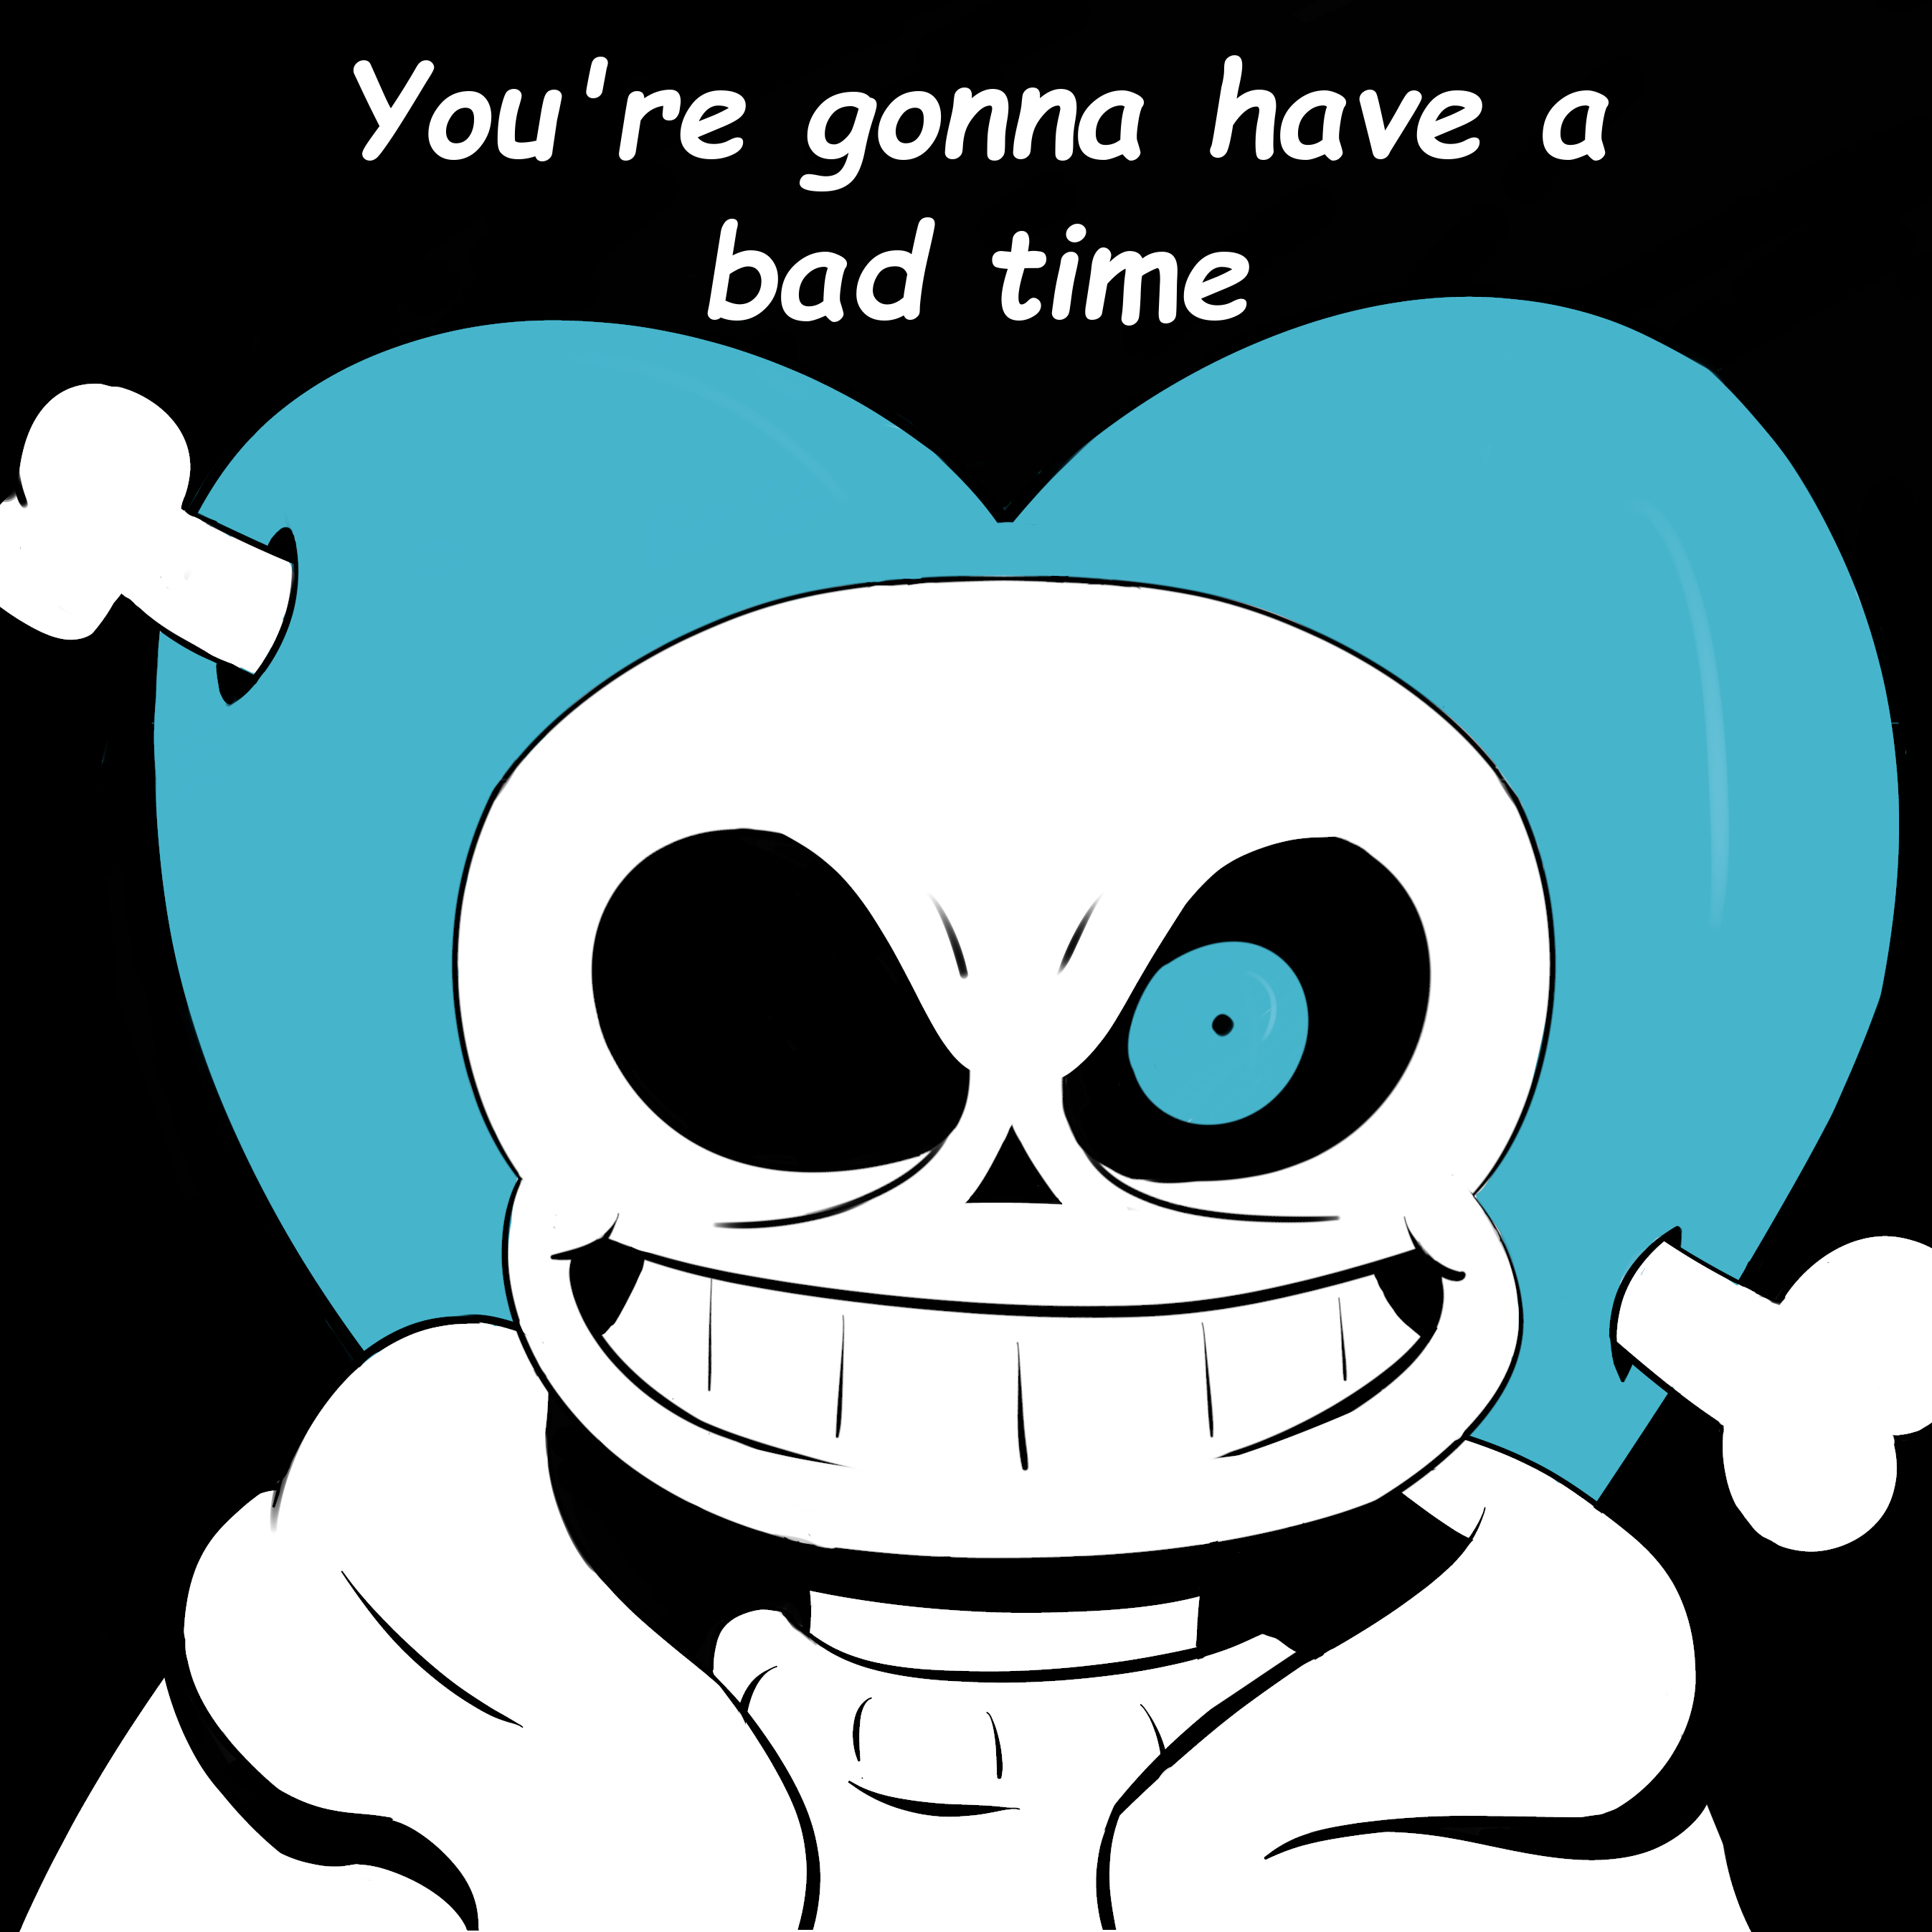 A bad time. 